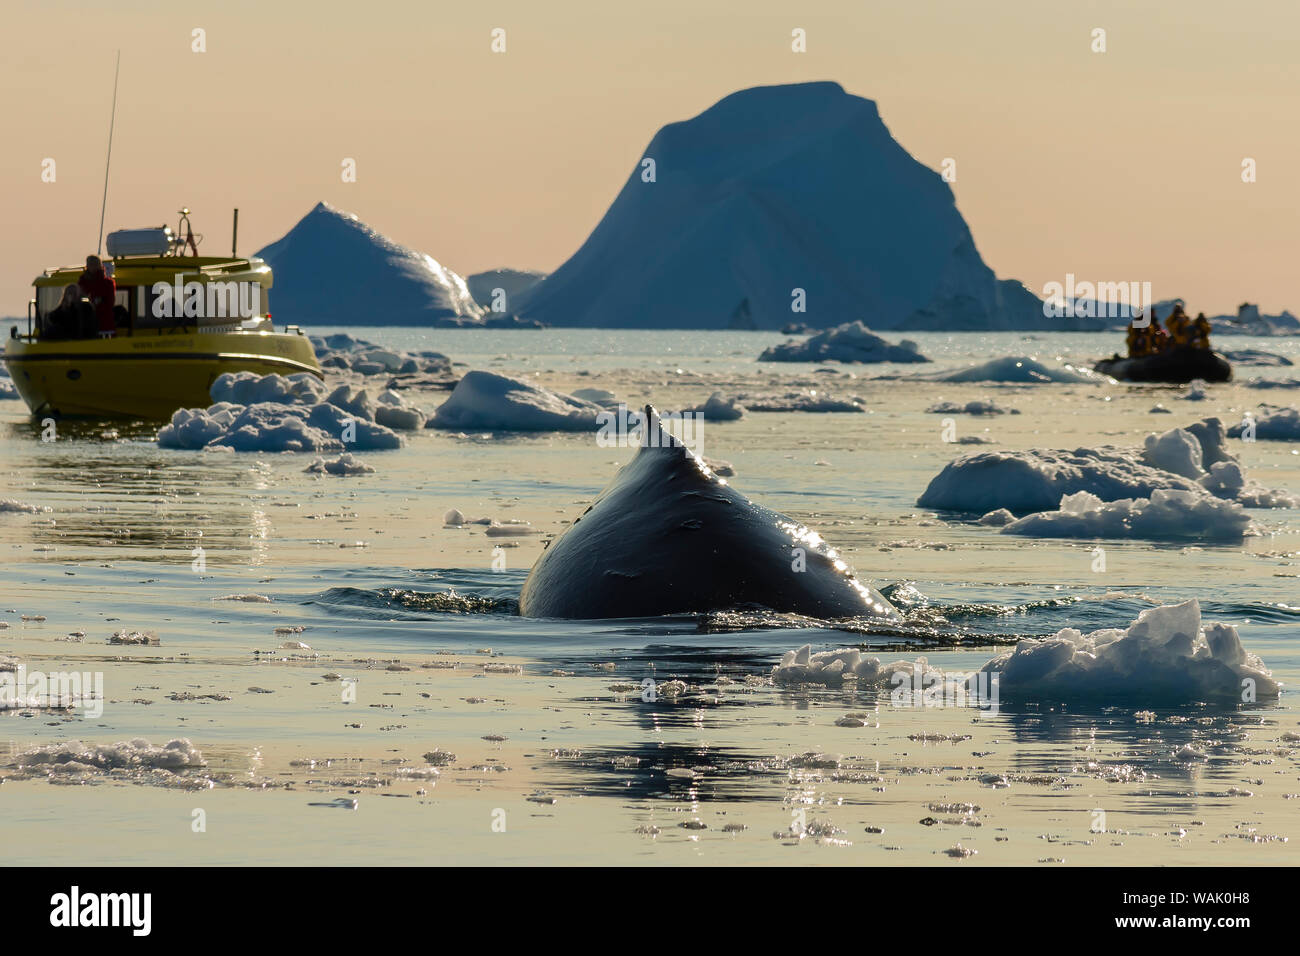 Greenland, Ilulissat. Whale watching in the Icefjord. Stock Photo